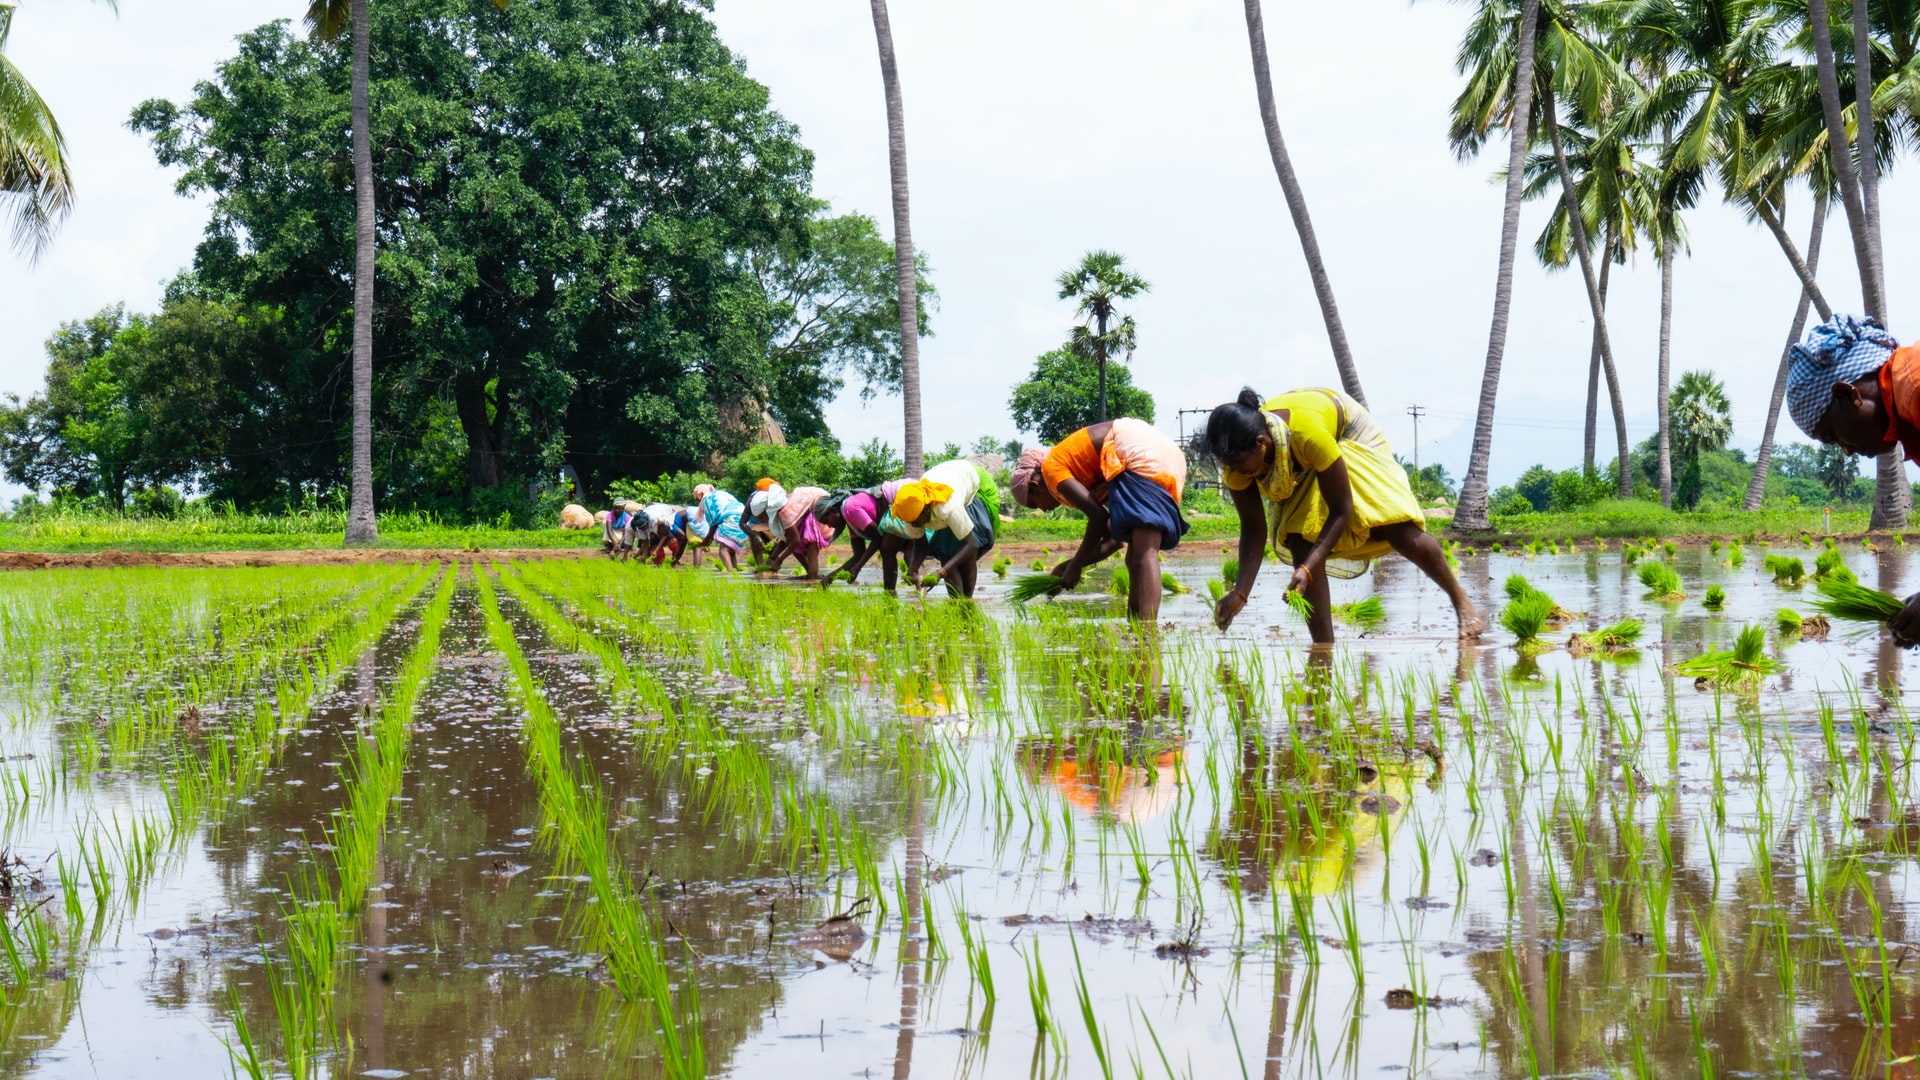 Usage of wastewater and sustainable agriculture can ensure water security in India